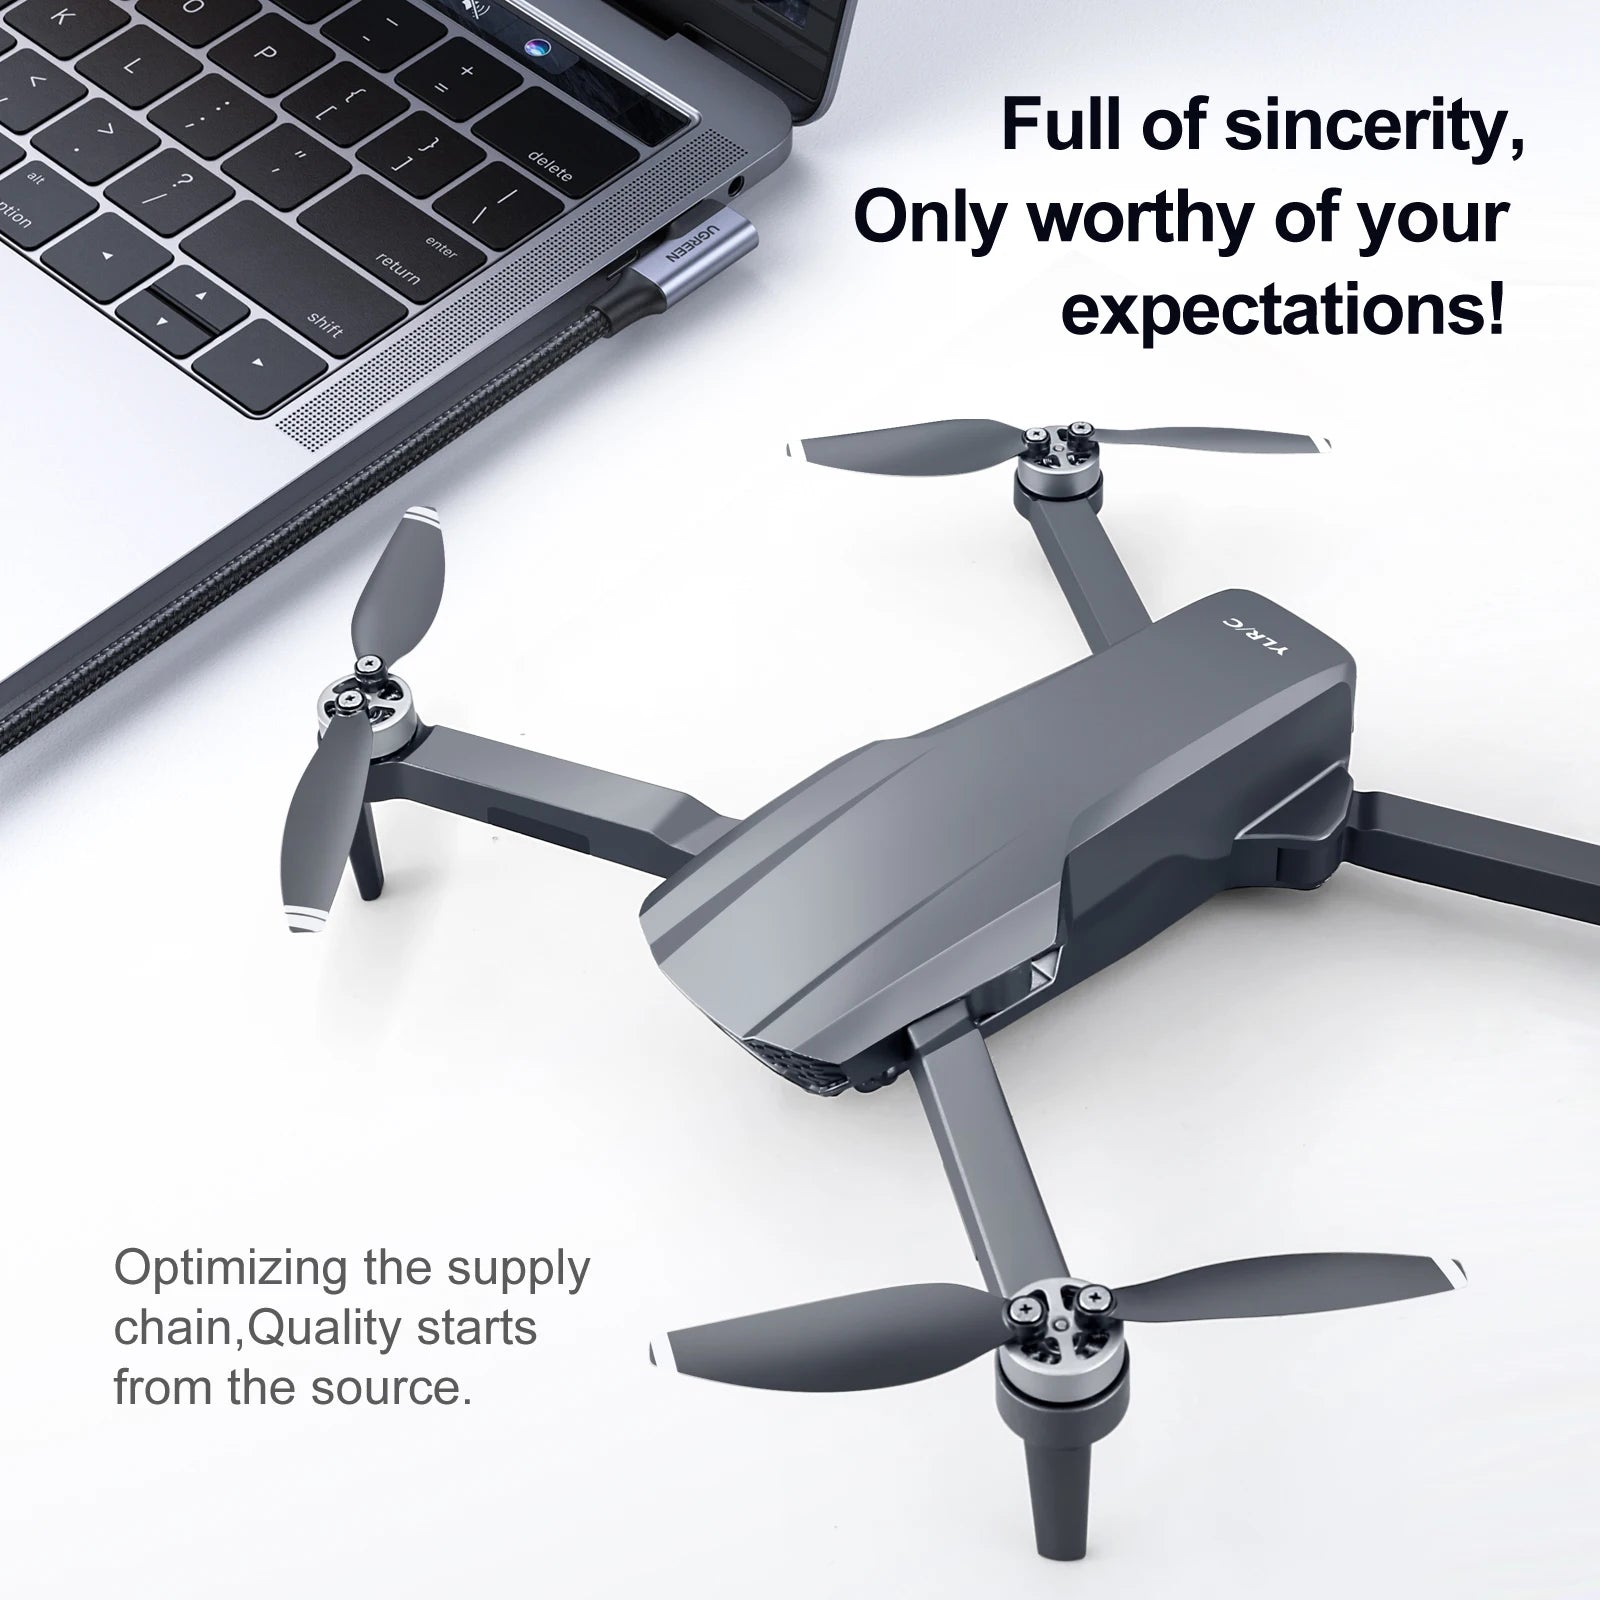 QJ S106 GPS Drone, full of sincerity, 9 only worthy of your expectations!